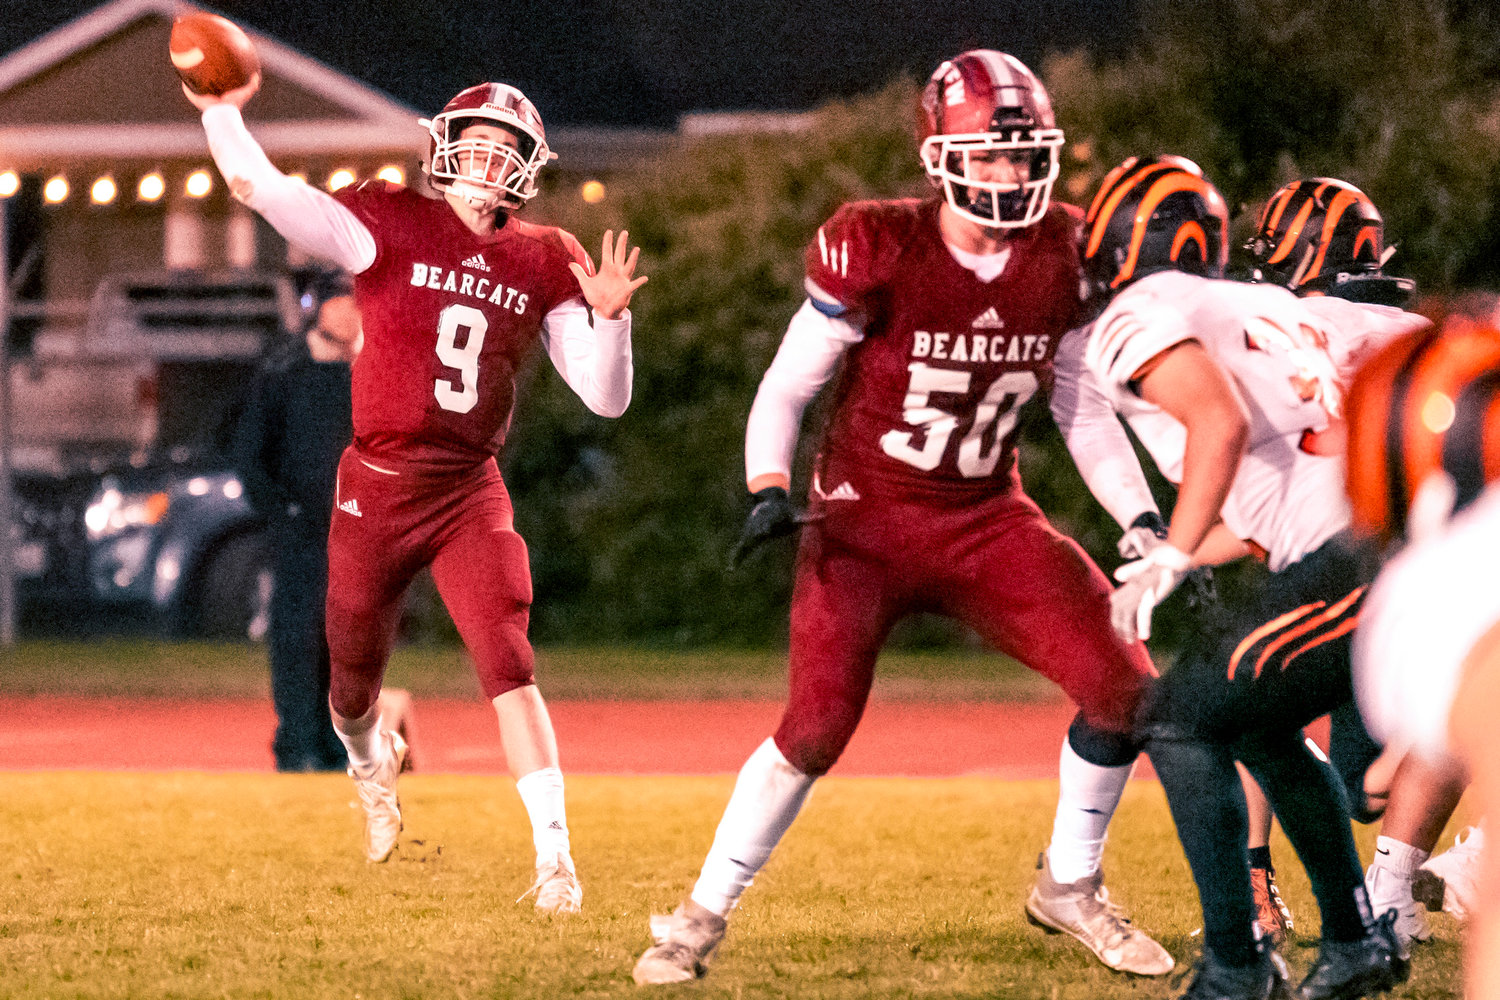 W.F. West’s Gavin Fugate (9) throws a pass Friday night during the Swamp Cup game at Bearcat Stadium.